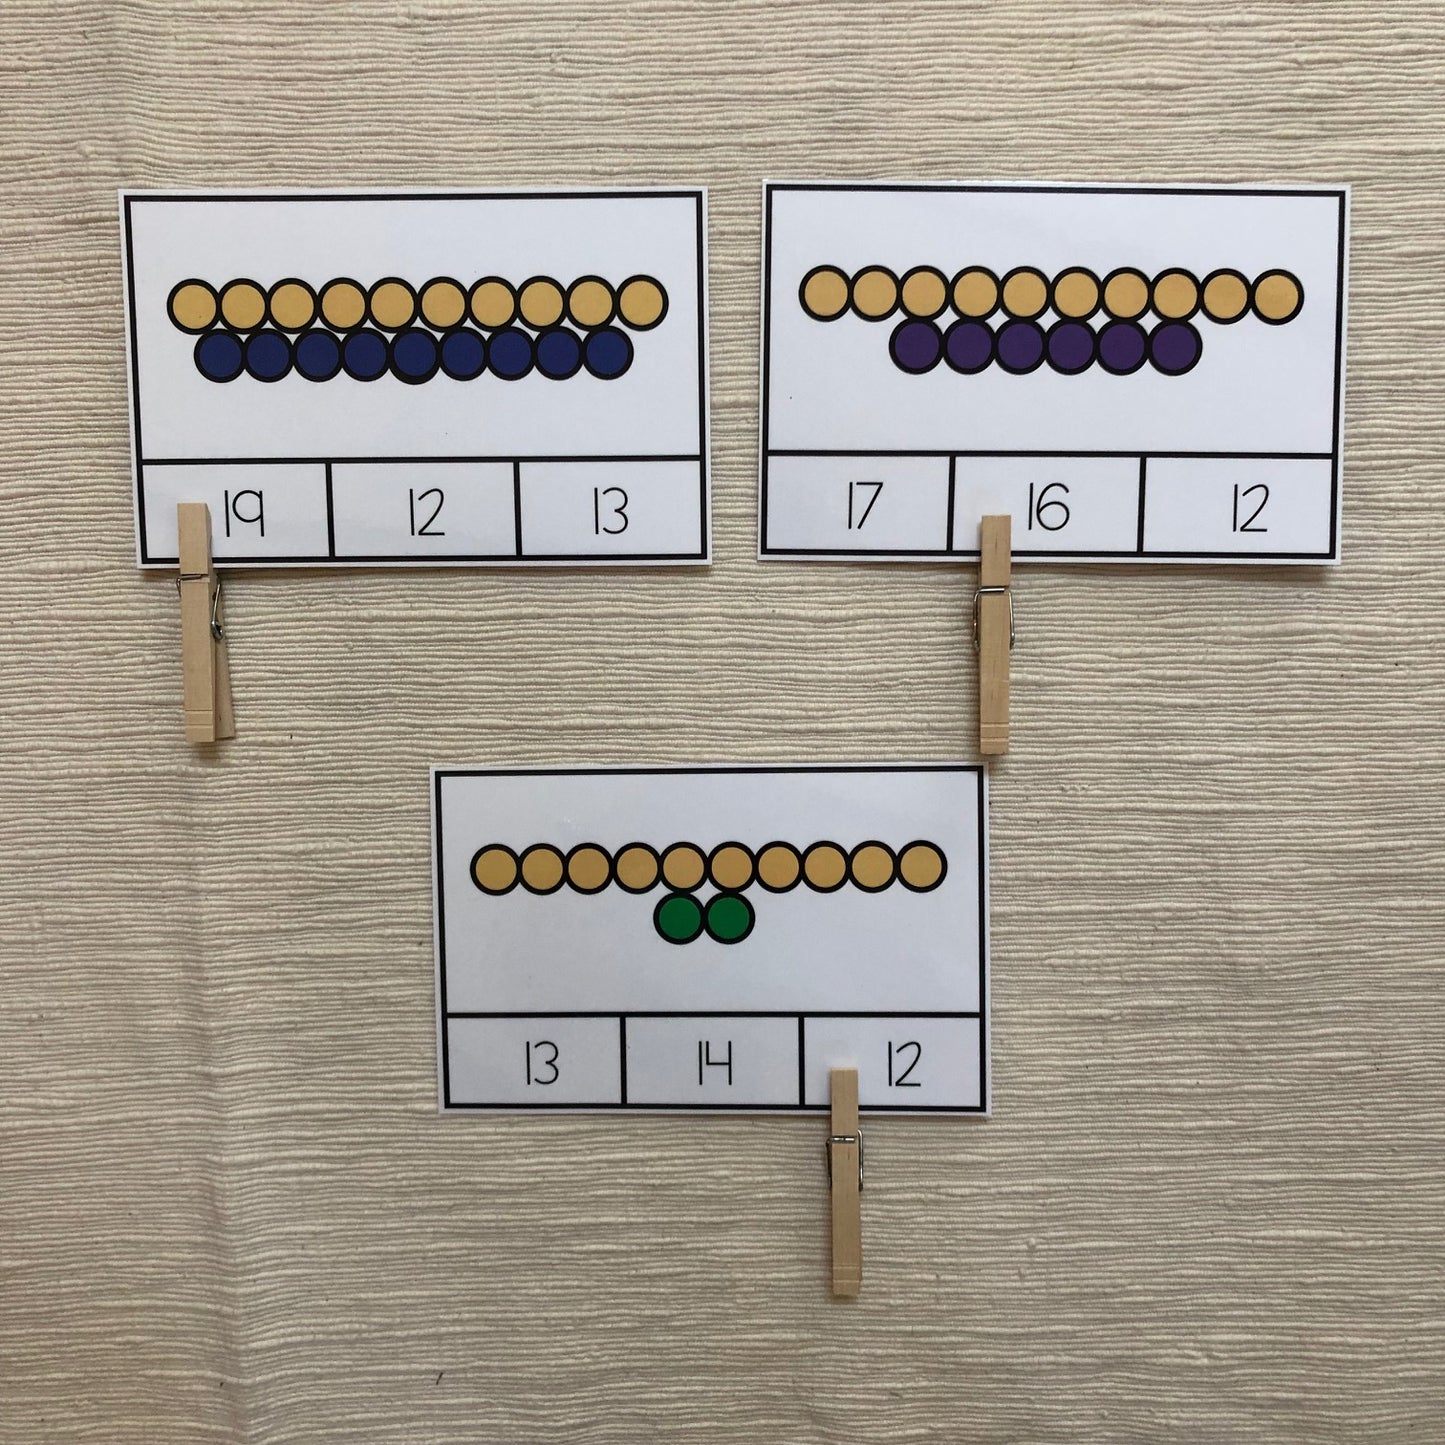 Colored beads clip cards 11-20 (teen numbers) - montessorikiwi